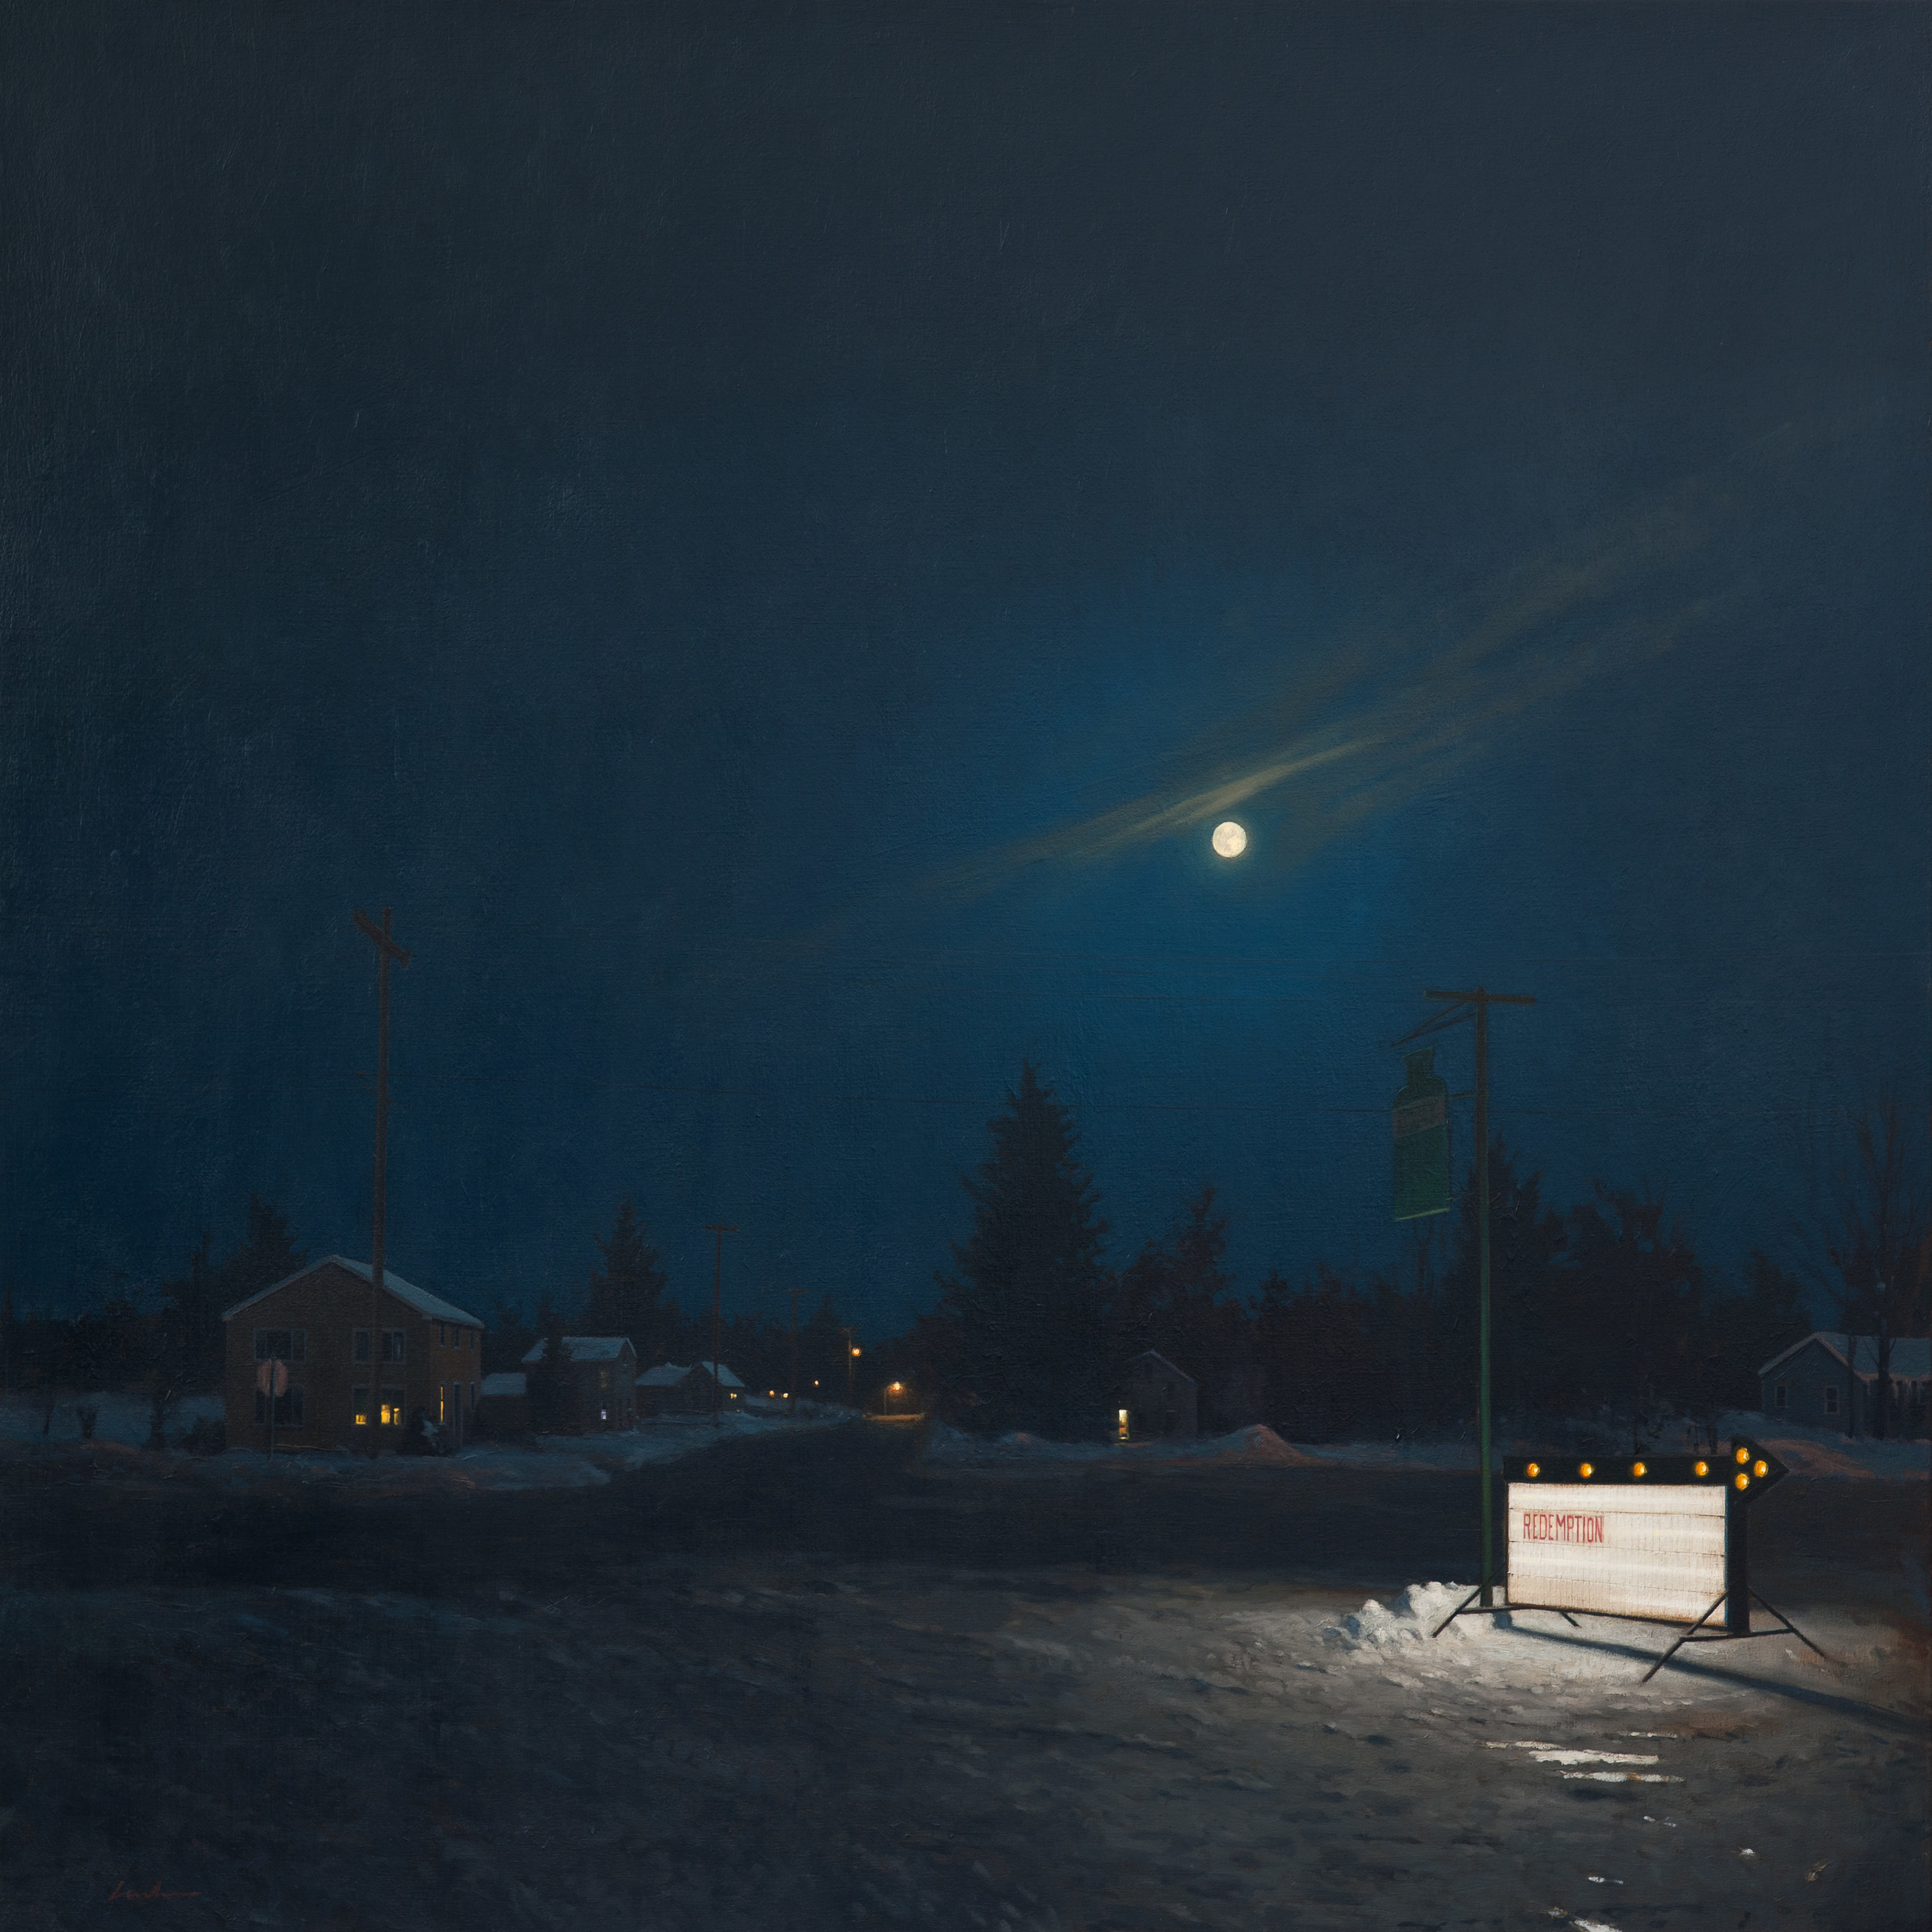 linden frederick, Redemption (SOLD), 2011, oil on linen, 45 x 45 inches